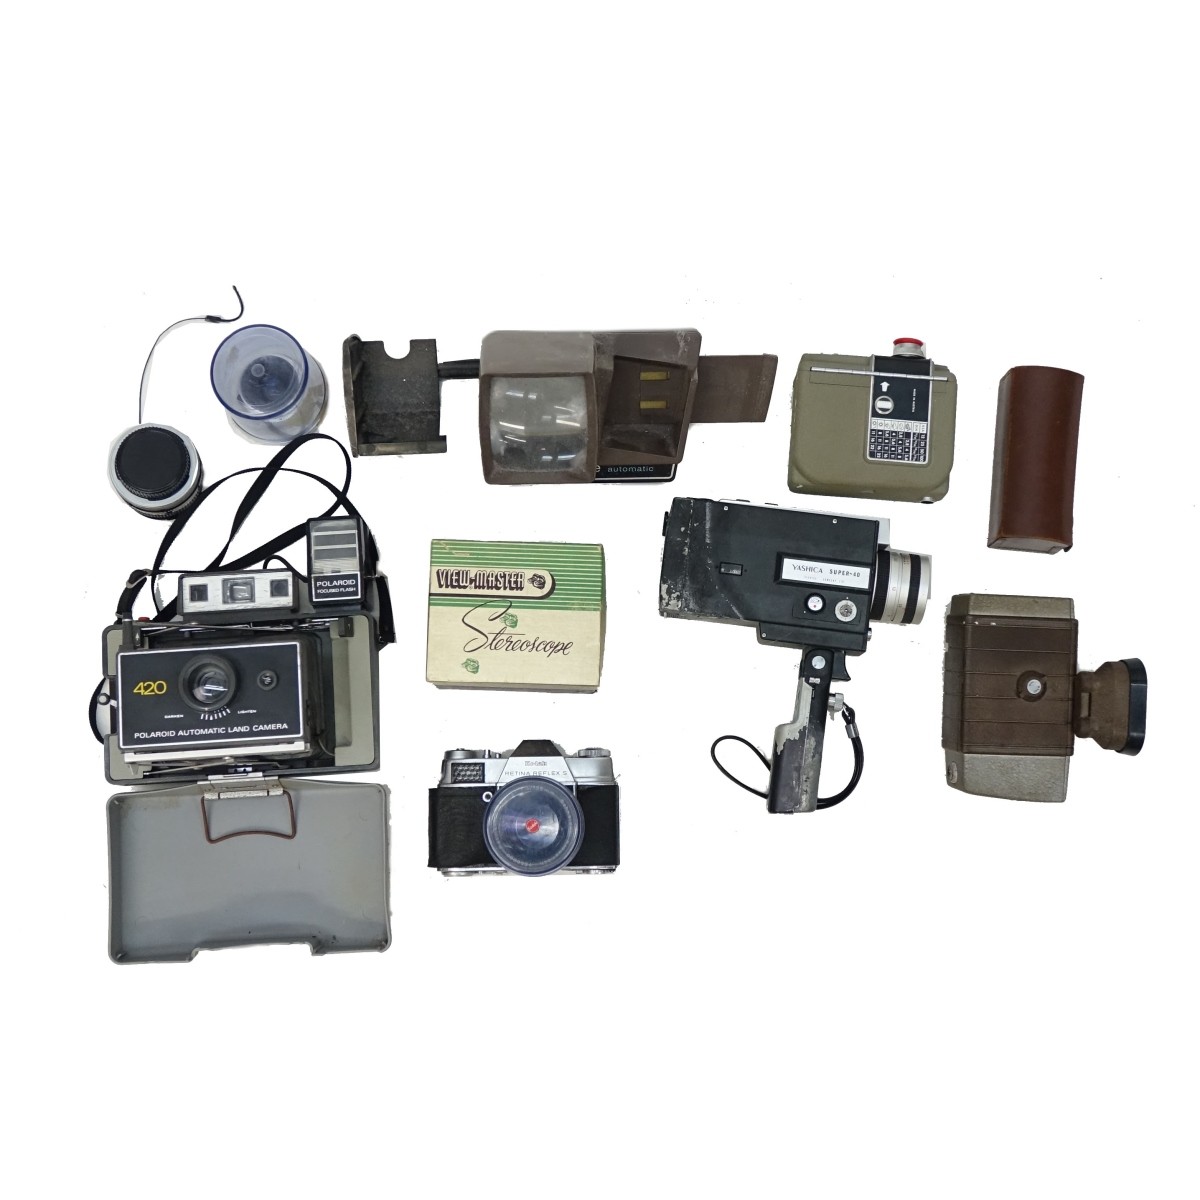 Assorted Cameras, Lenses, and Equipment.